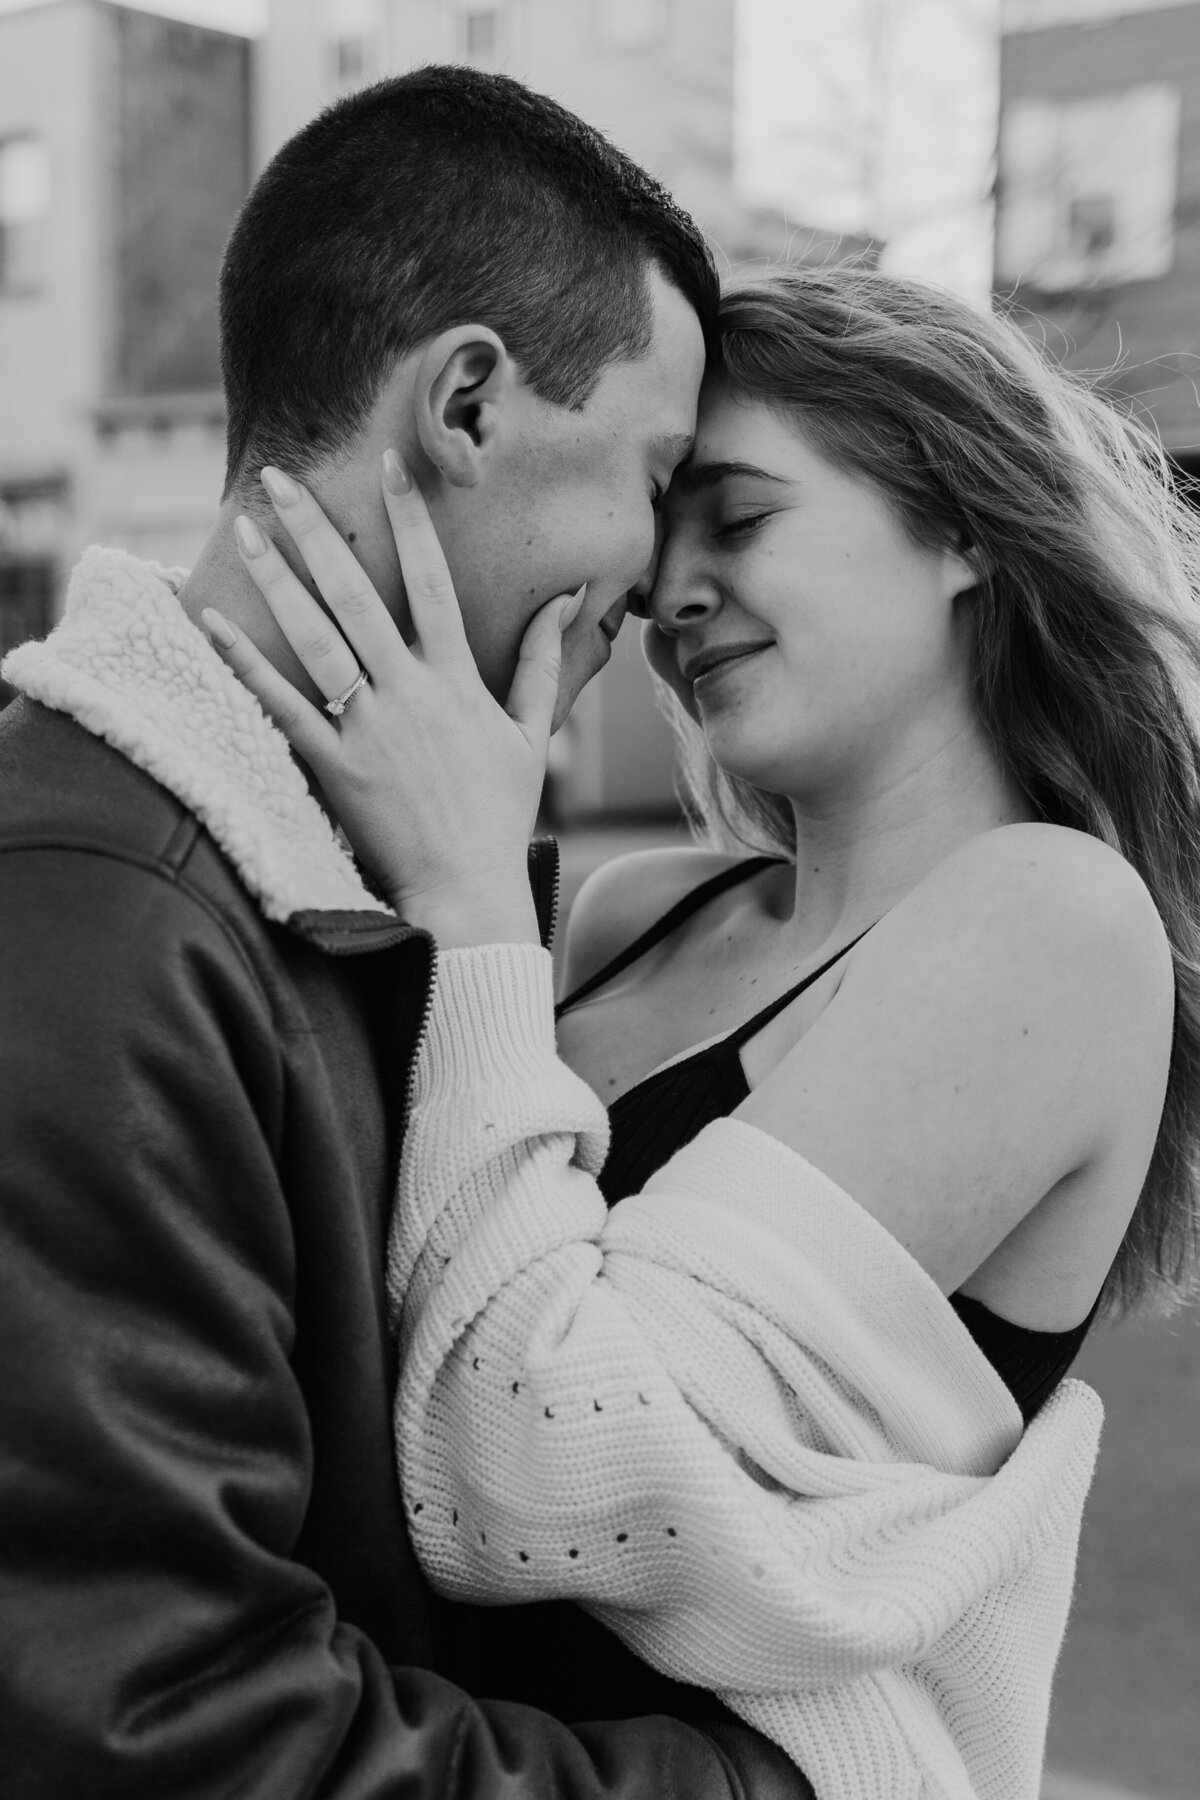 A black and white photo capturing an intimate moment between an engaged couple, with the woman embracing the man's face gently as they touch foreheads, showcasing their affection and the woman's engagement ring.